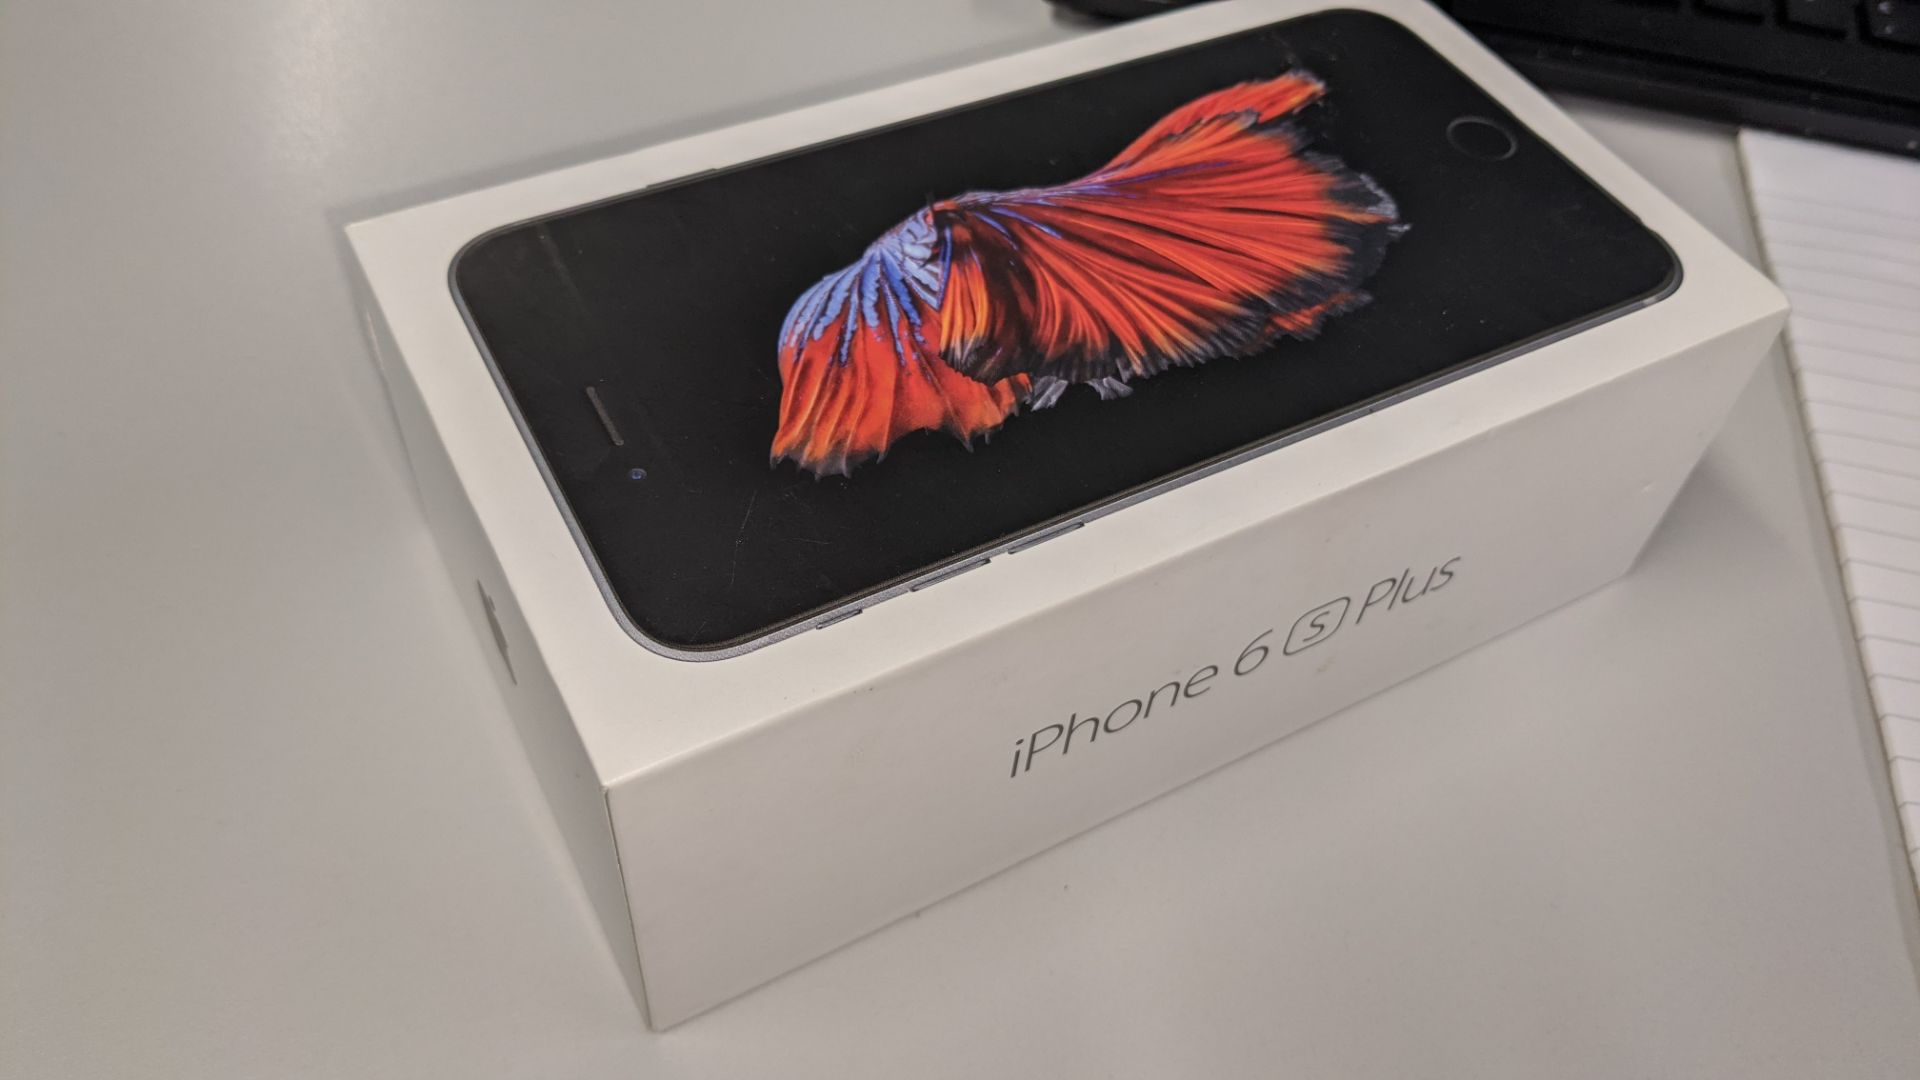 Apple iPhone 6s Plus (32 Gb) in space grey - Image 10 of 38